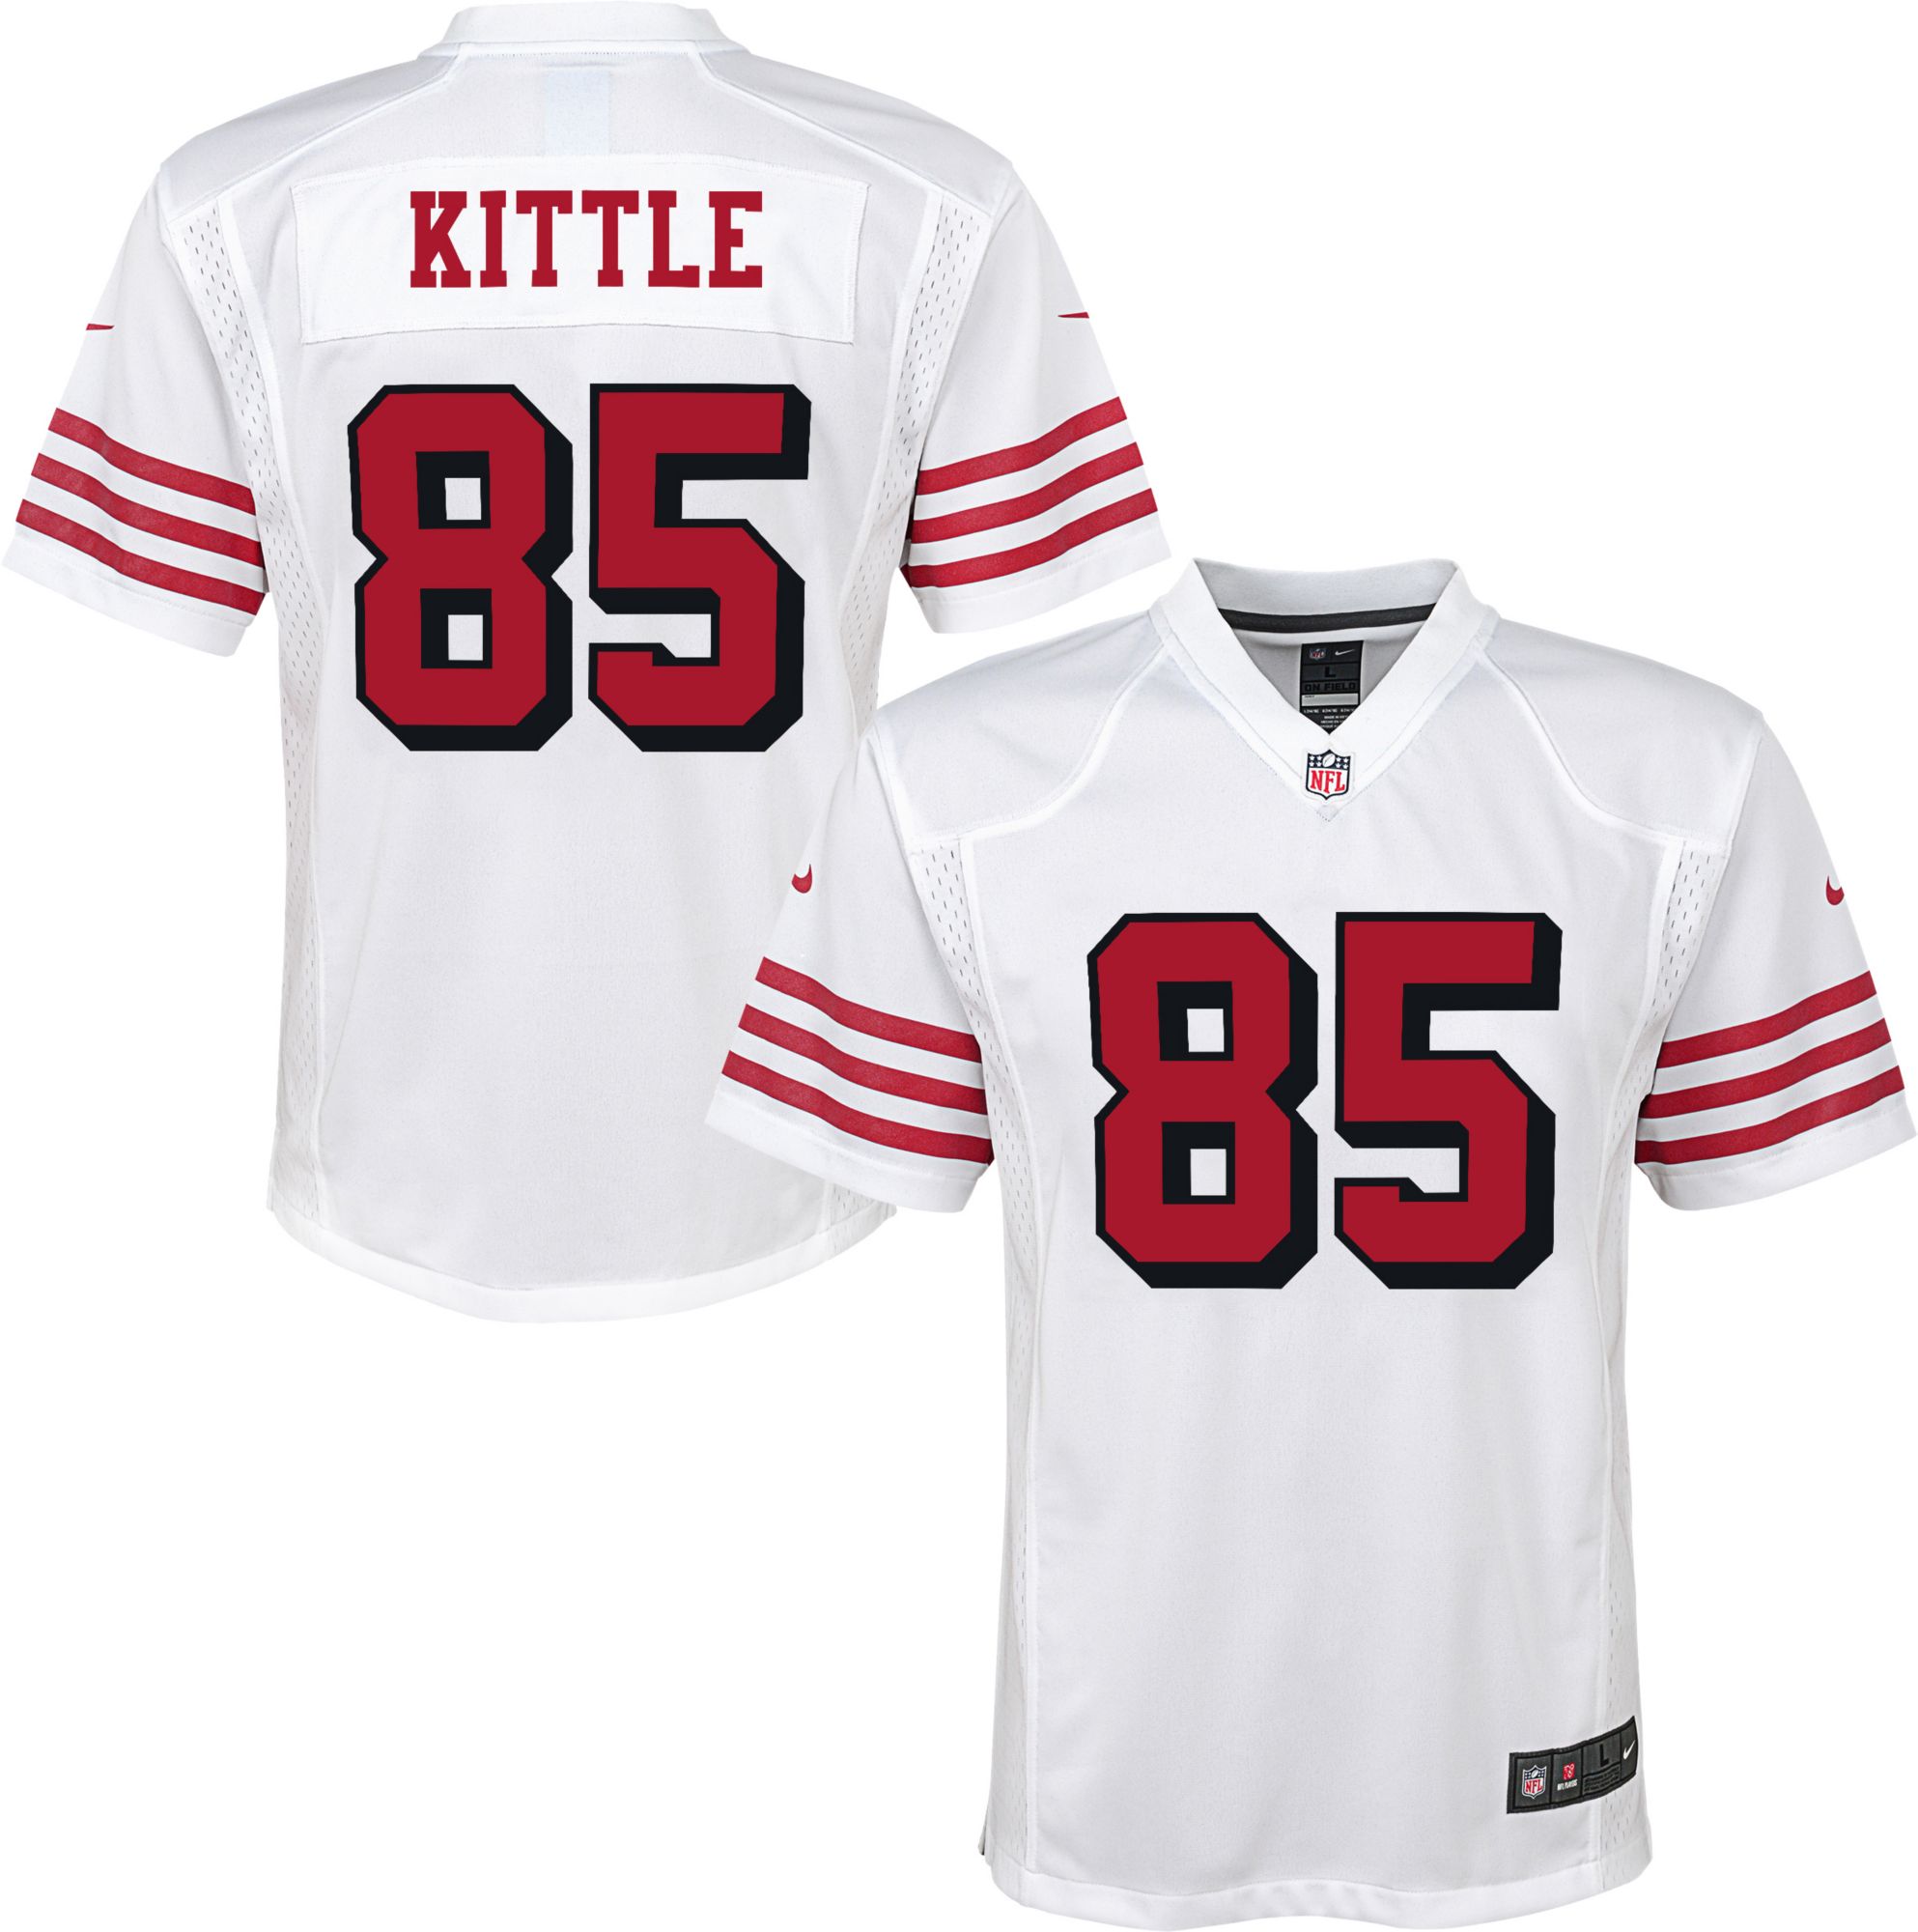 kittle game jersey